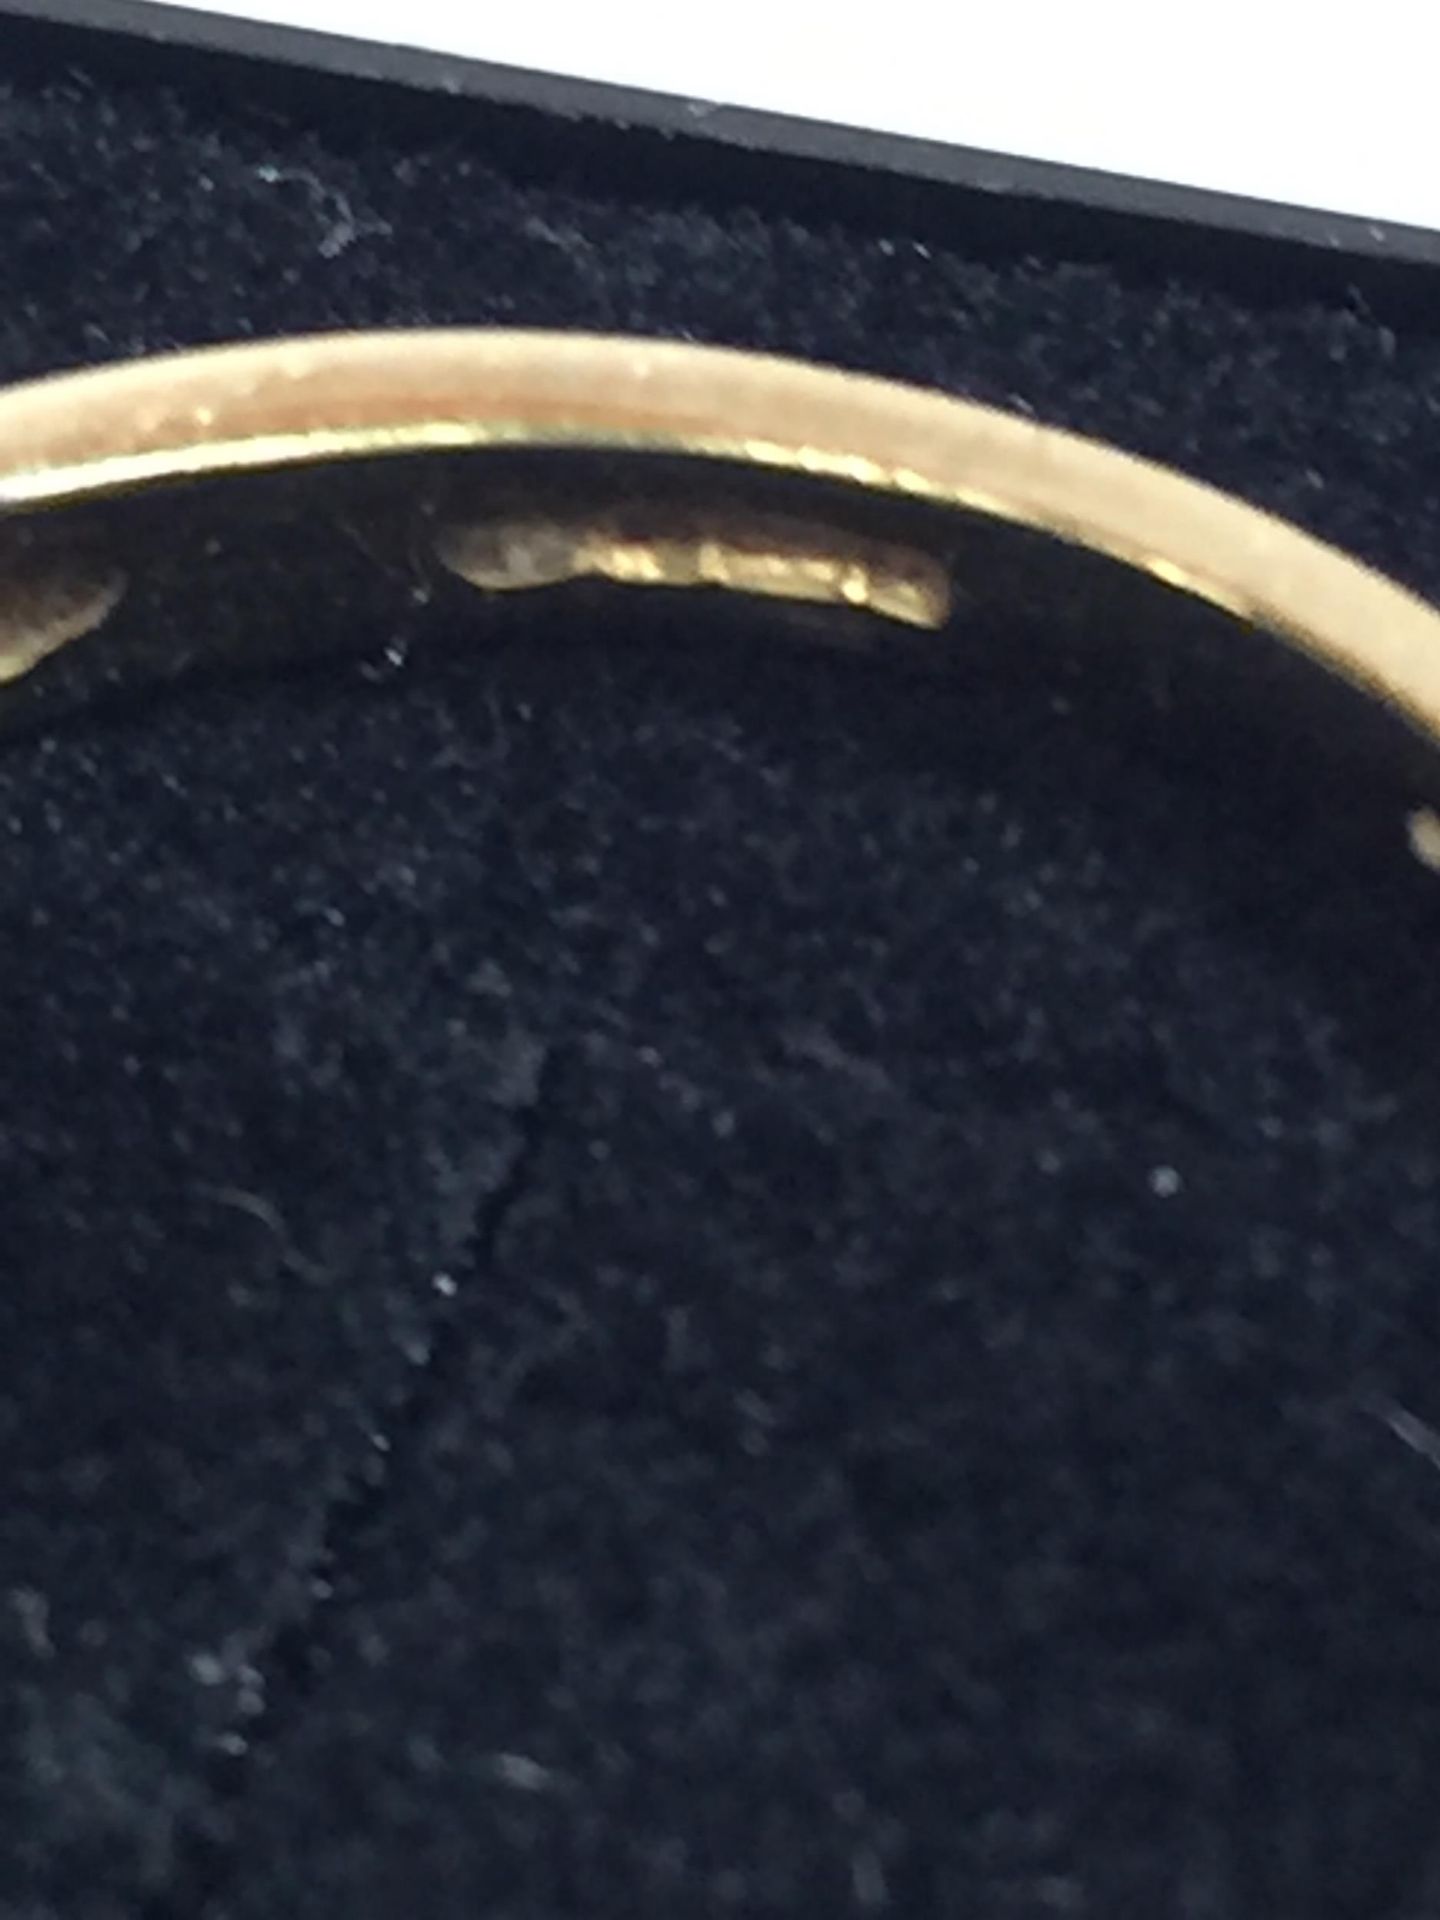 A 9CT GOLD WISHBONE RING WITH 7 DIAMONDS, WEIGHT 2G, SIZE Q - Image 3 of 3